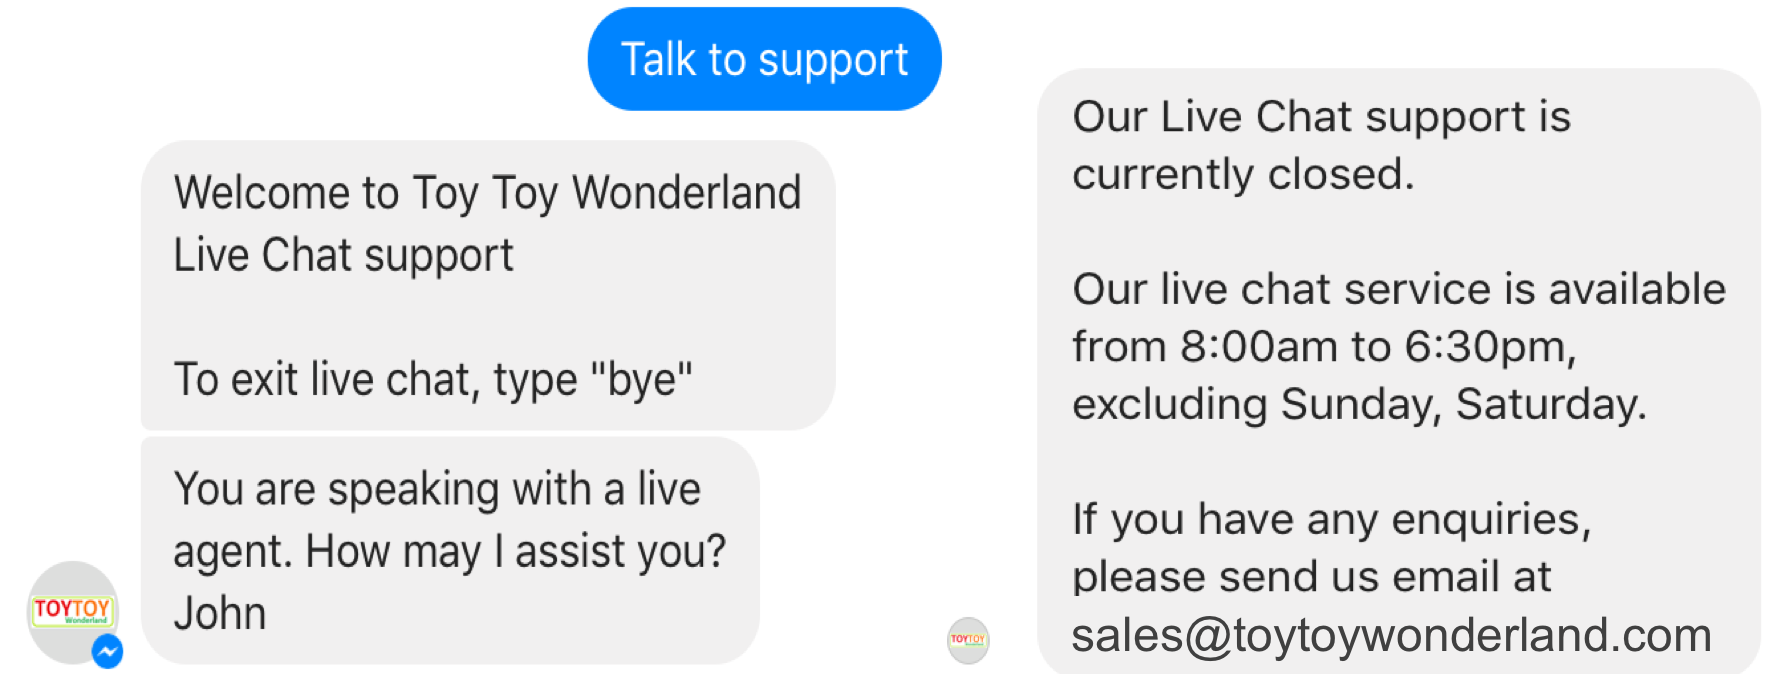 Live chat service